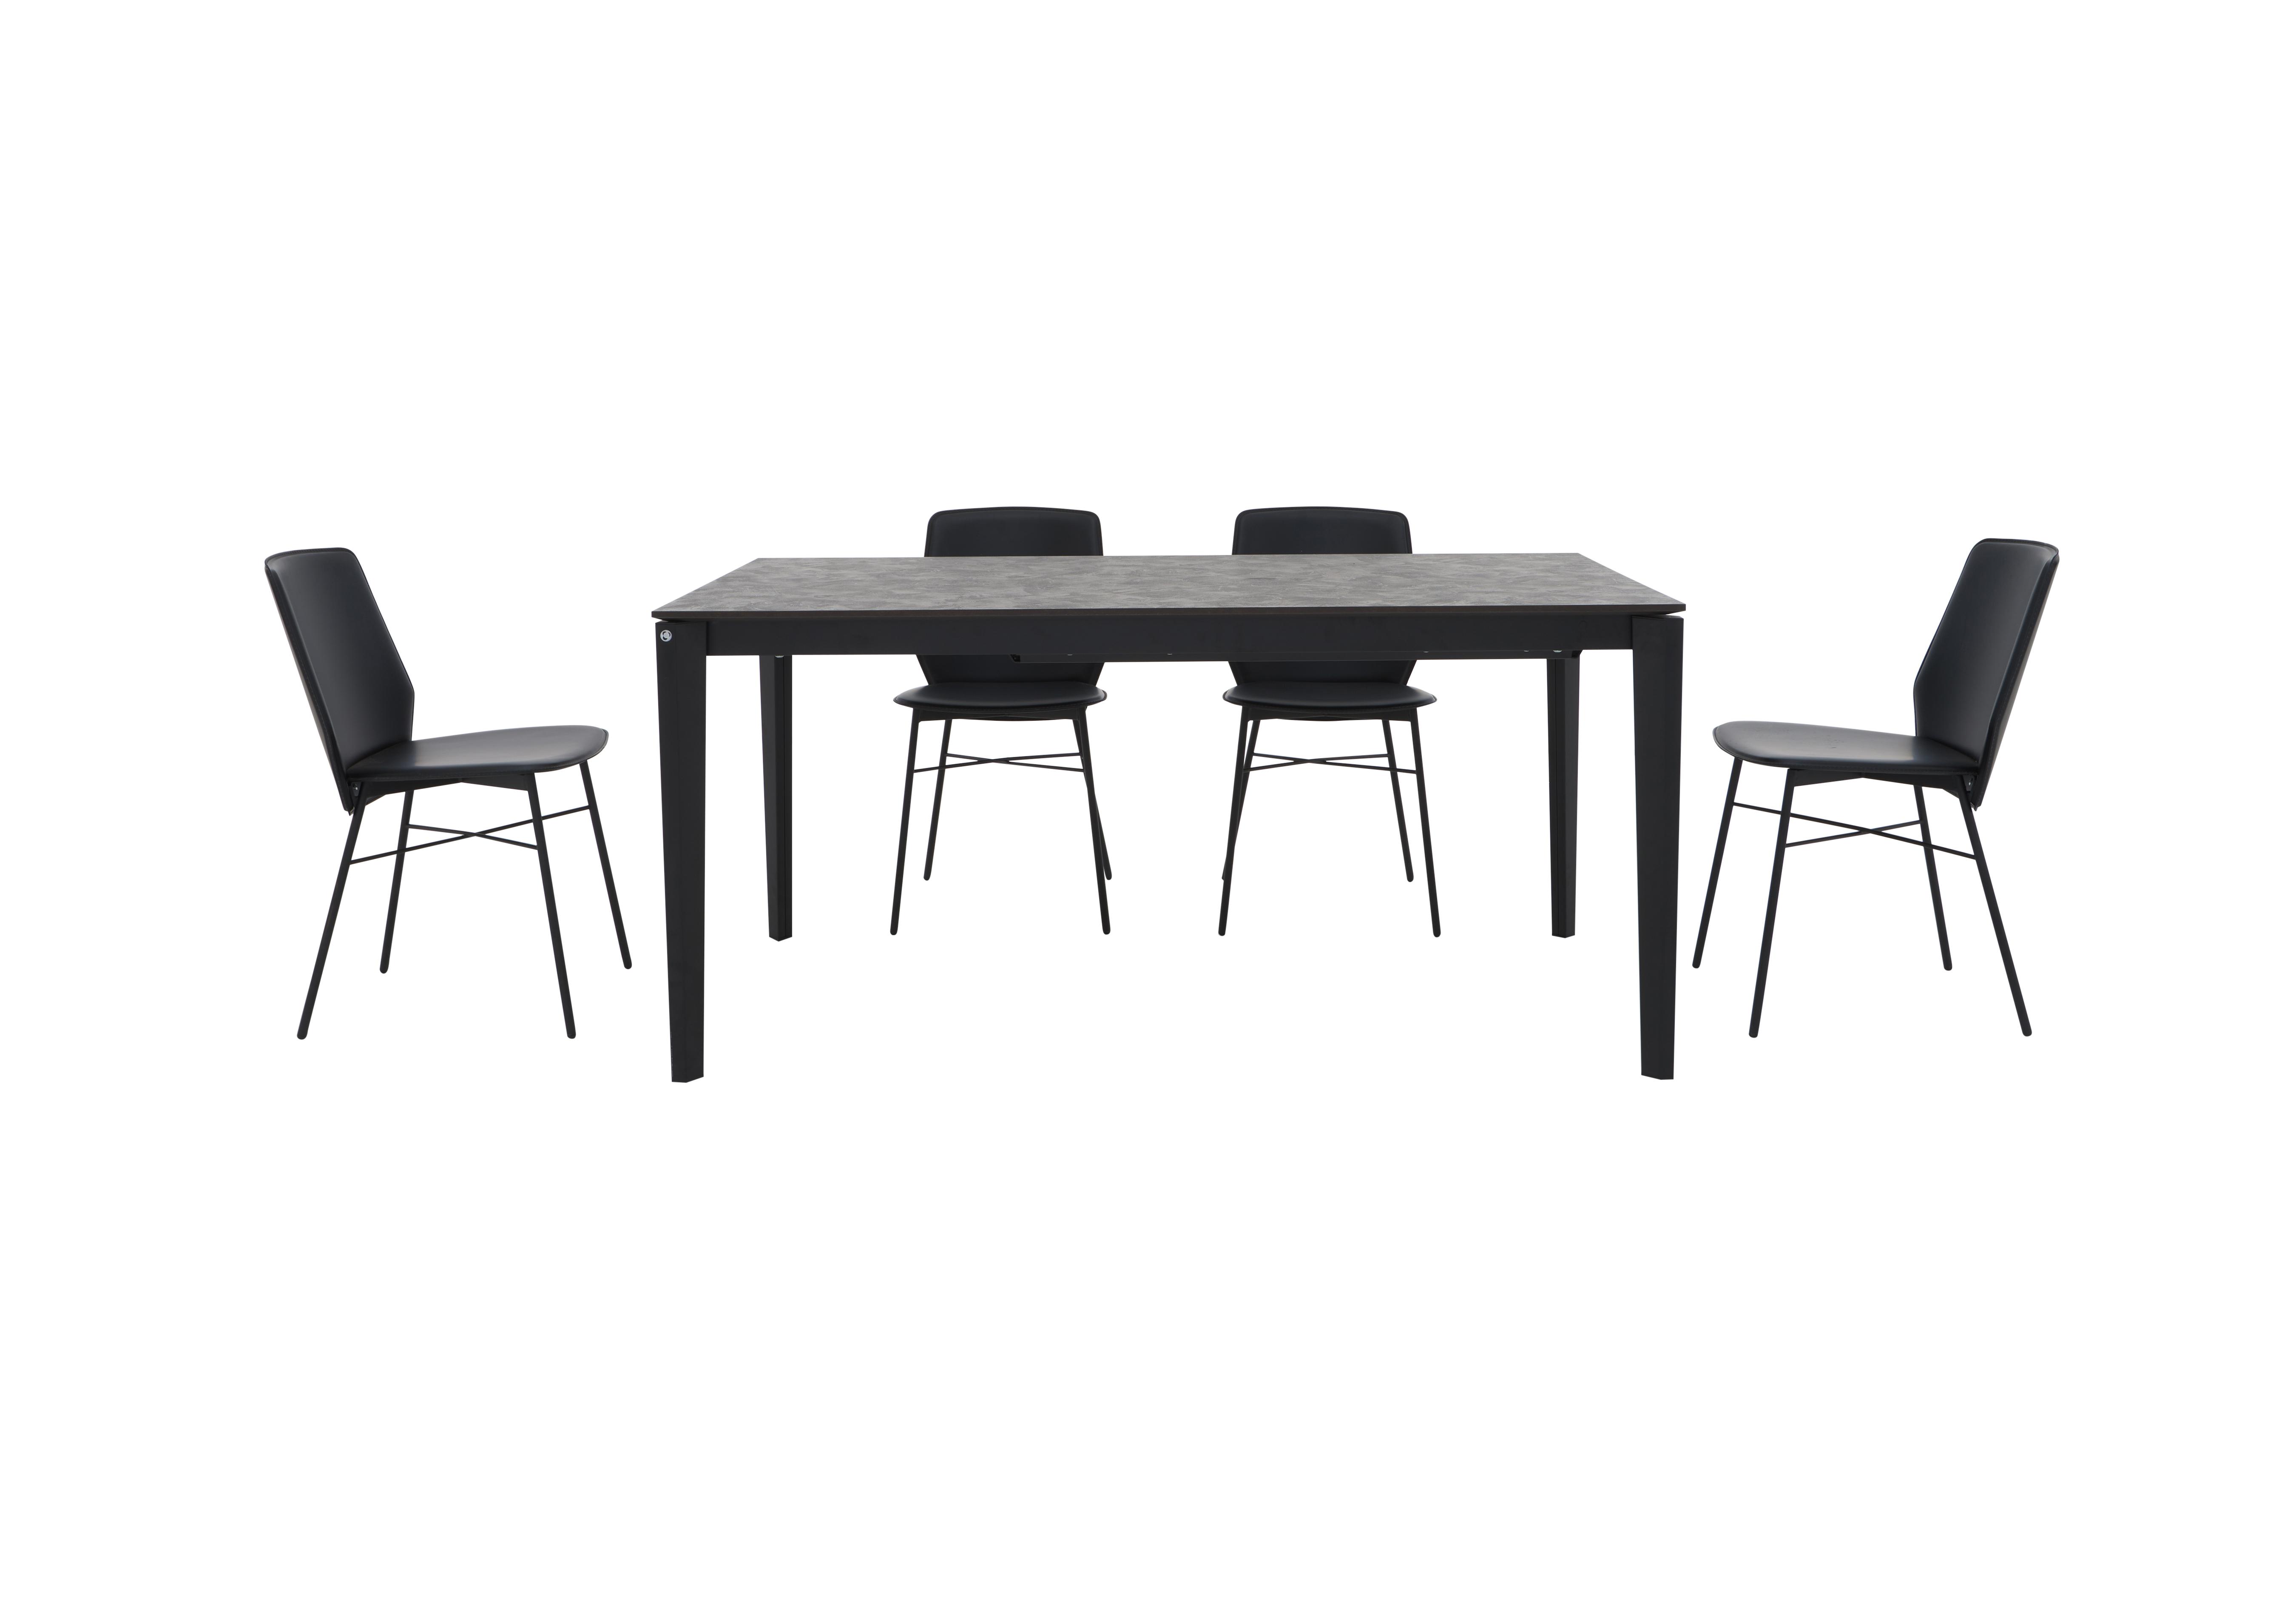 Pentagon Extending Dining Table with Oxide Bronze Top and 4 Sibilla Dining Chairs in Black/Black on Furniture Village